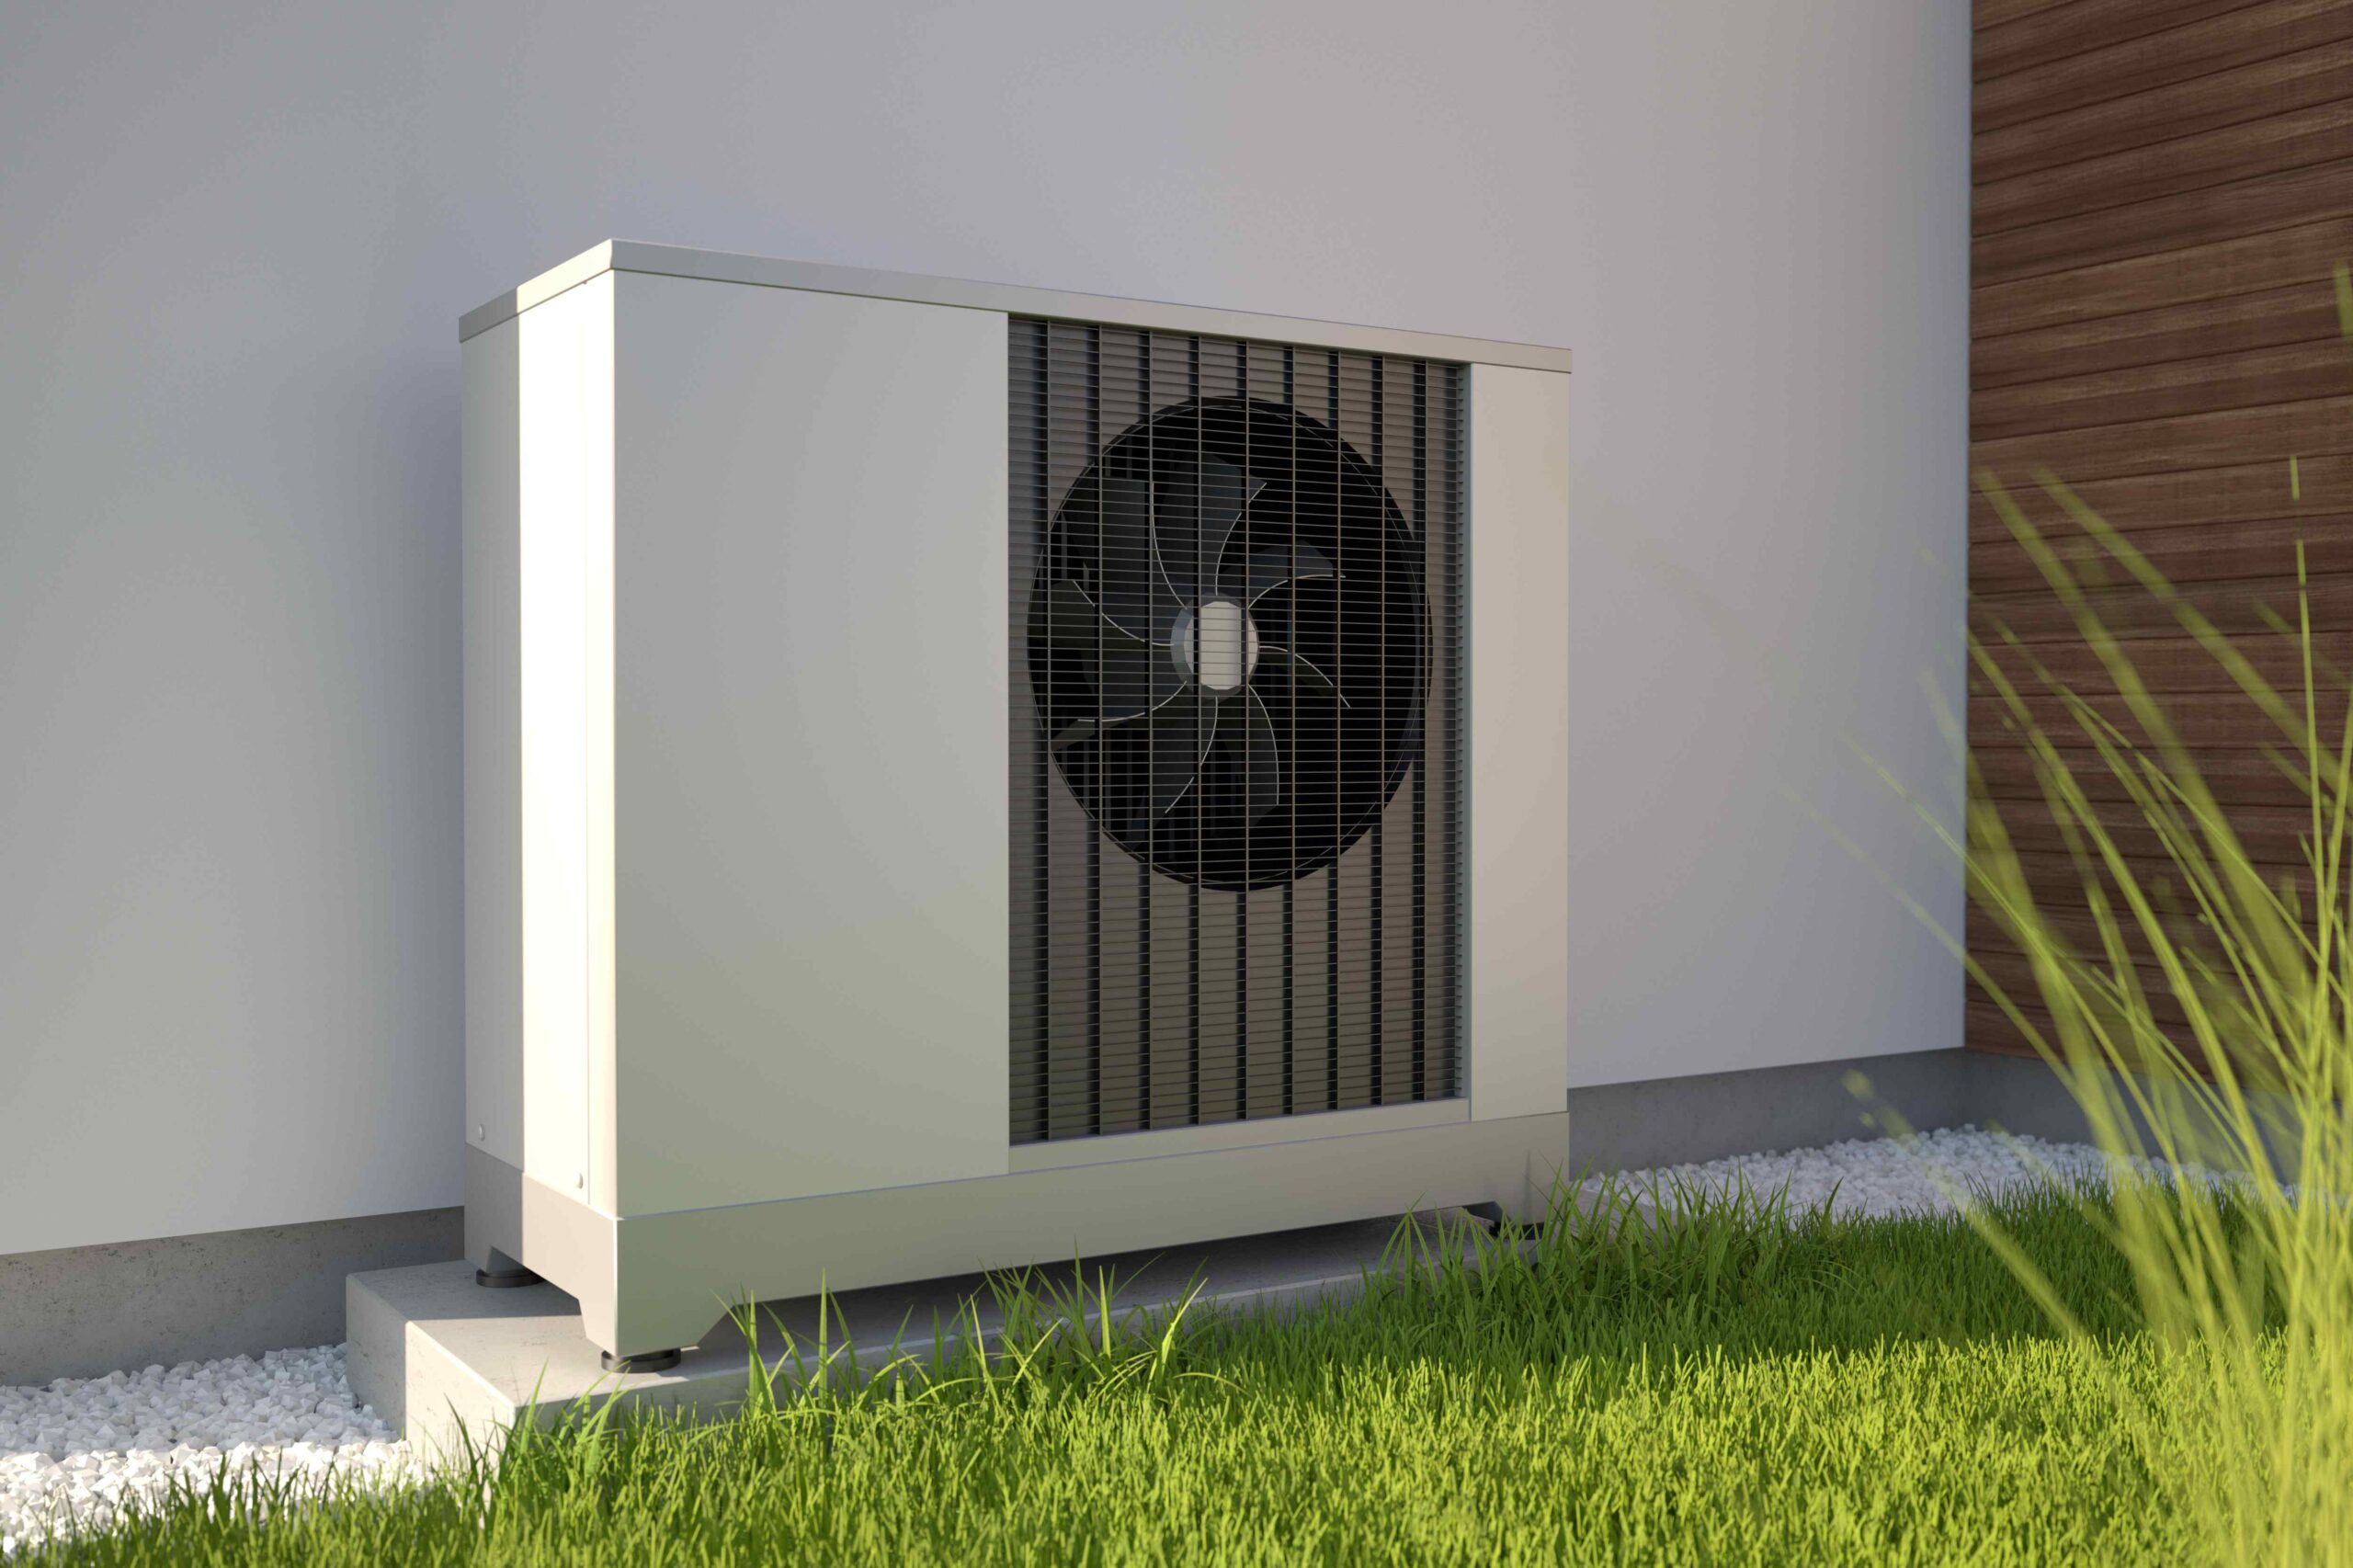 Environmentally friendly and efficient: a new type of heat pump that sets standards worldwide